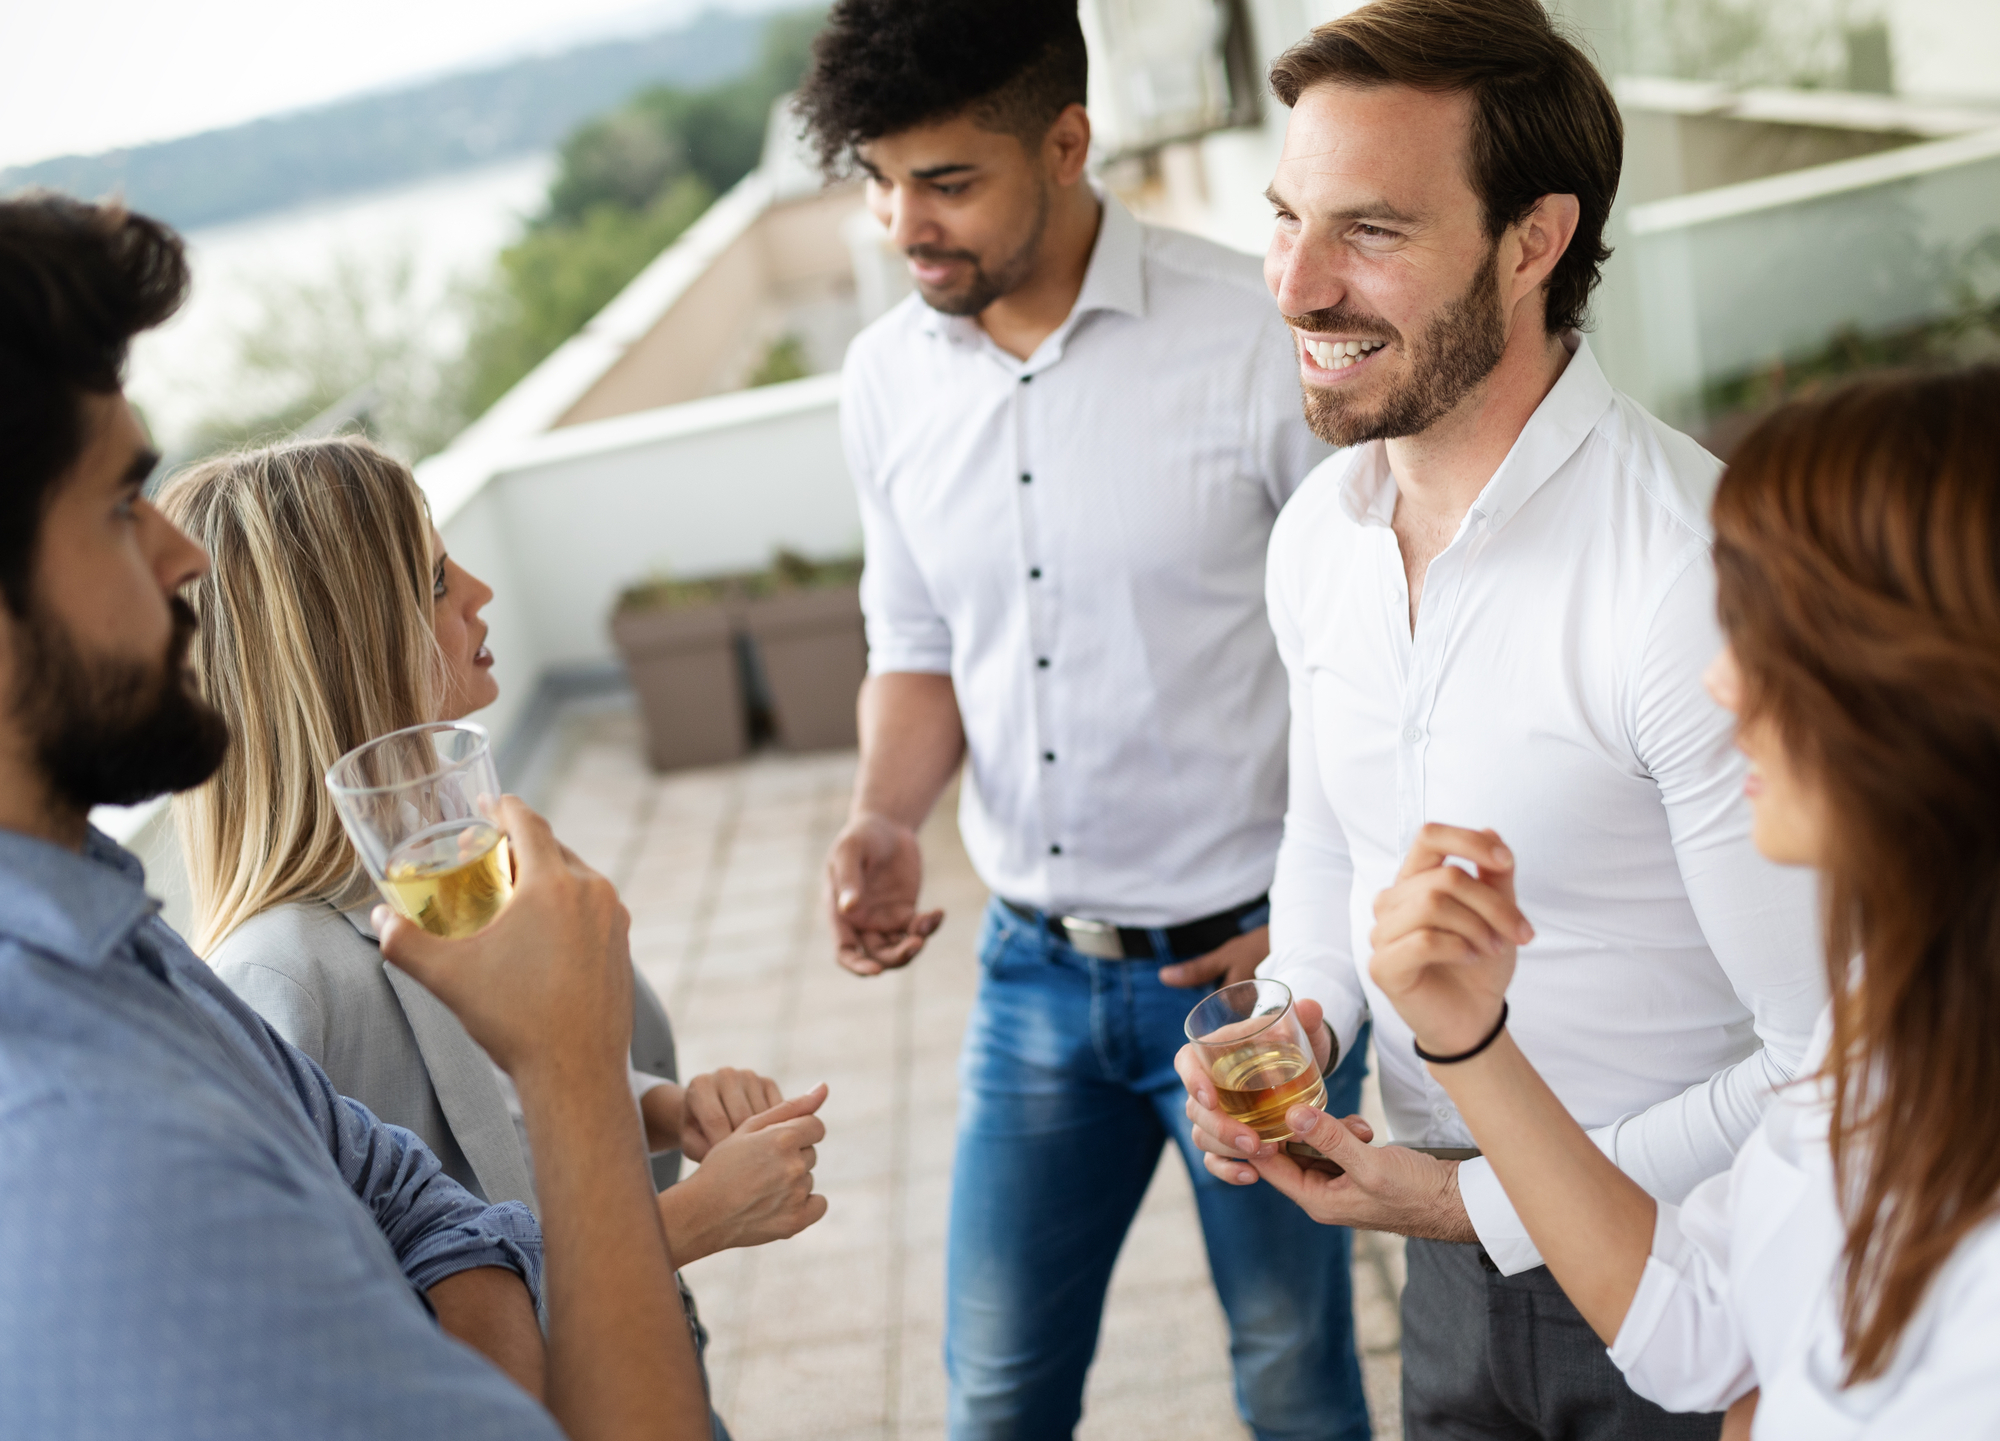 A group of five people casually talking and enjoying drinks on an outdoor terrace. They appear to be relaxed, with some smiling and holding glasses. The background includes a view of the landscape, featuring greenery and a body of water.